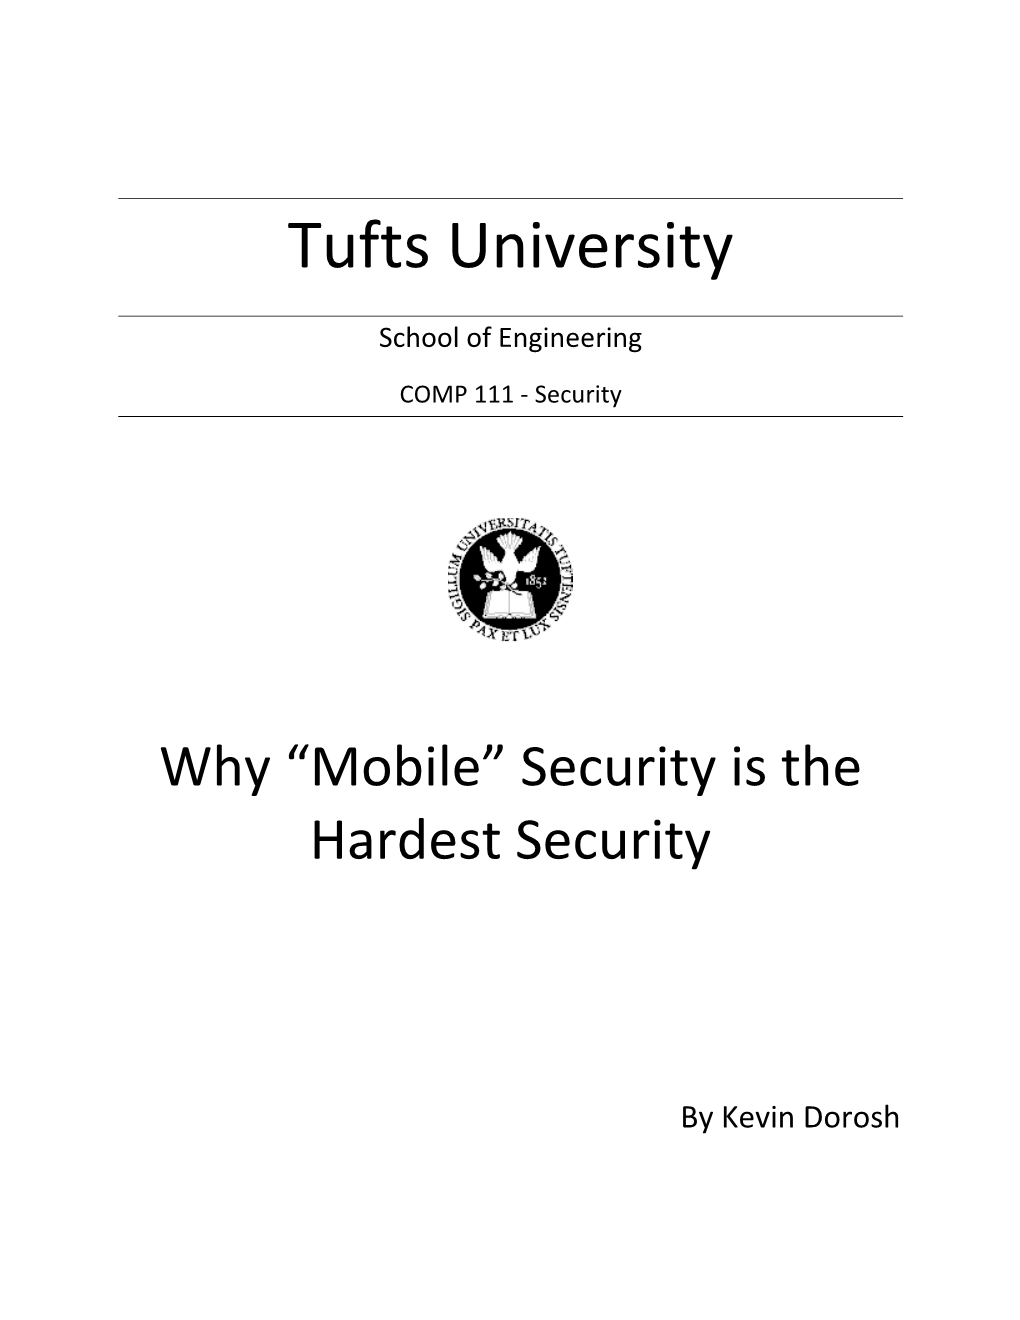 Why “Mobile” Security Is the Hardest Security